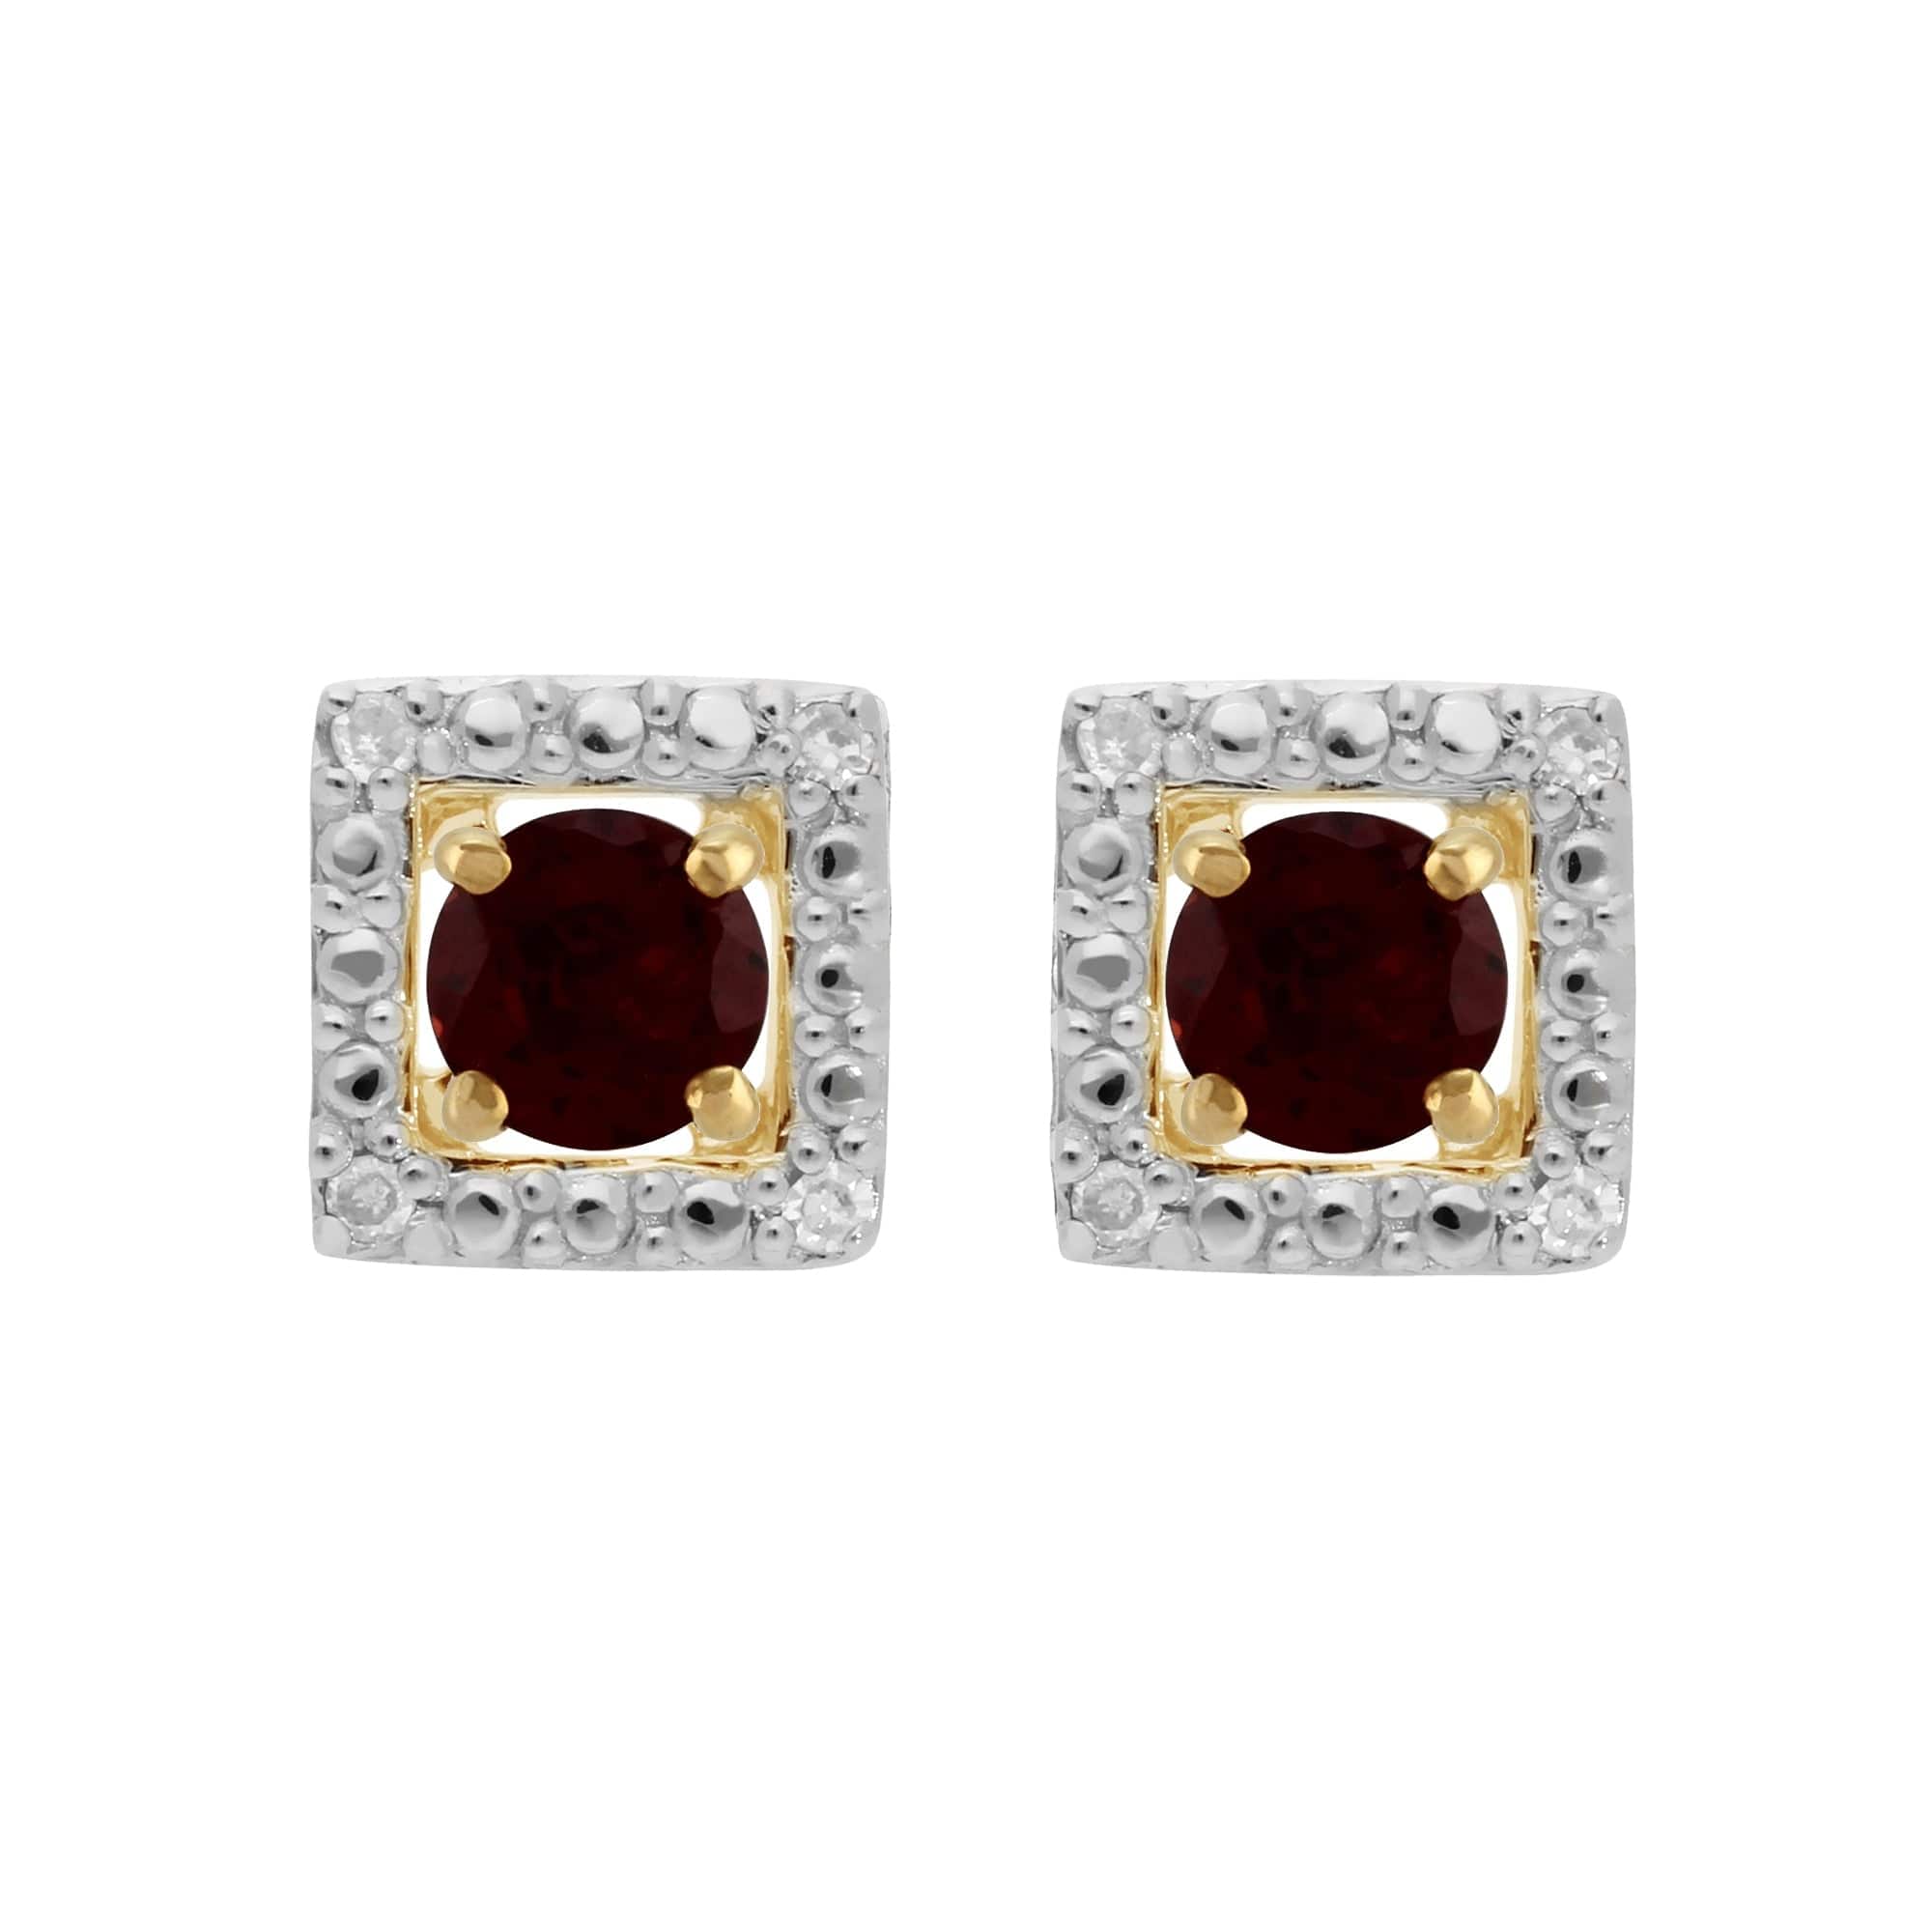 11568-191E0379019 Classic Round Garnet Stud Earrings with Detachable Diamond Square Earrings Jacket Set in 9ct Yellow Gold 1